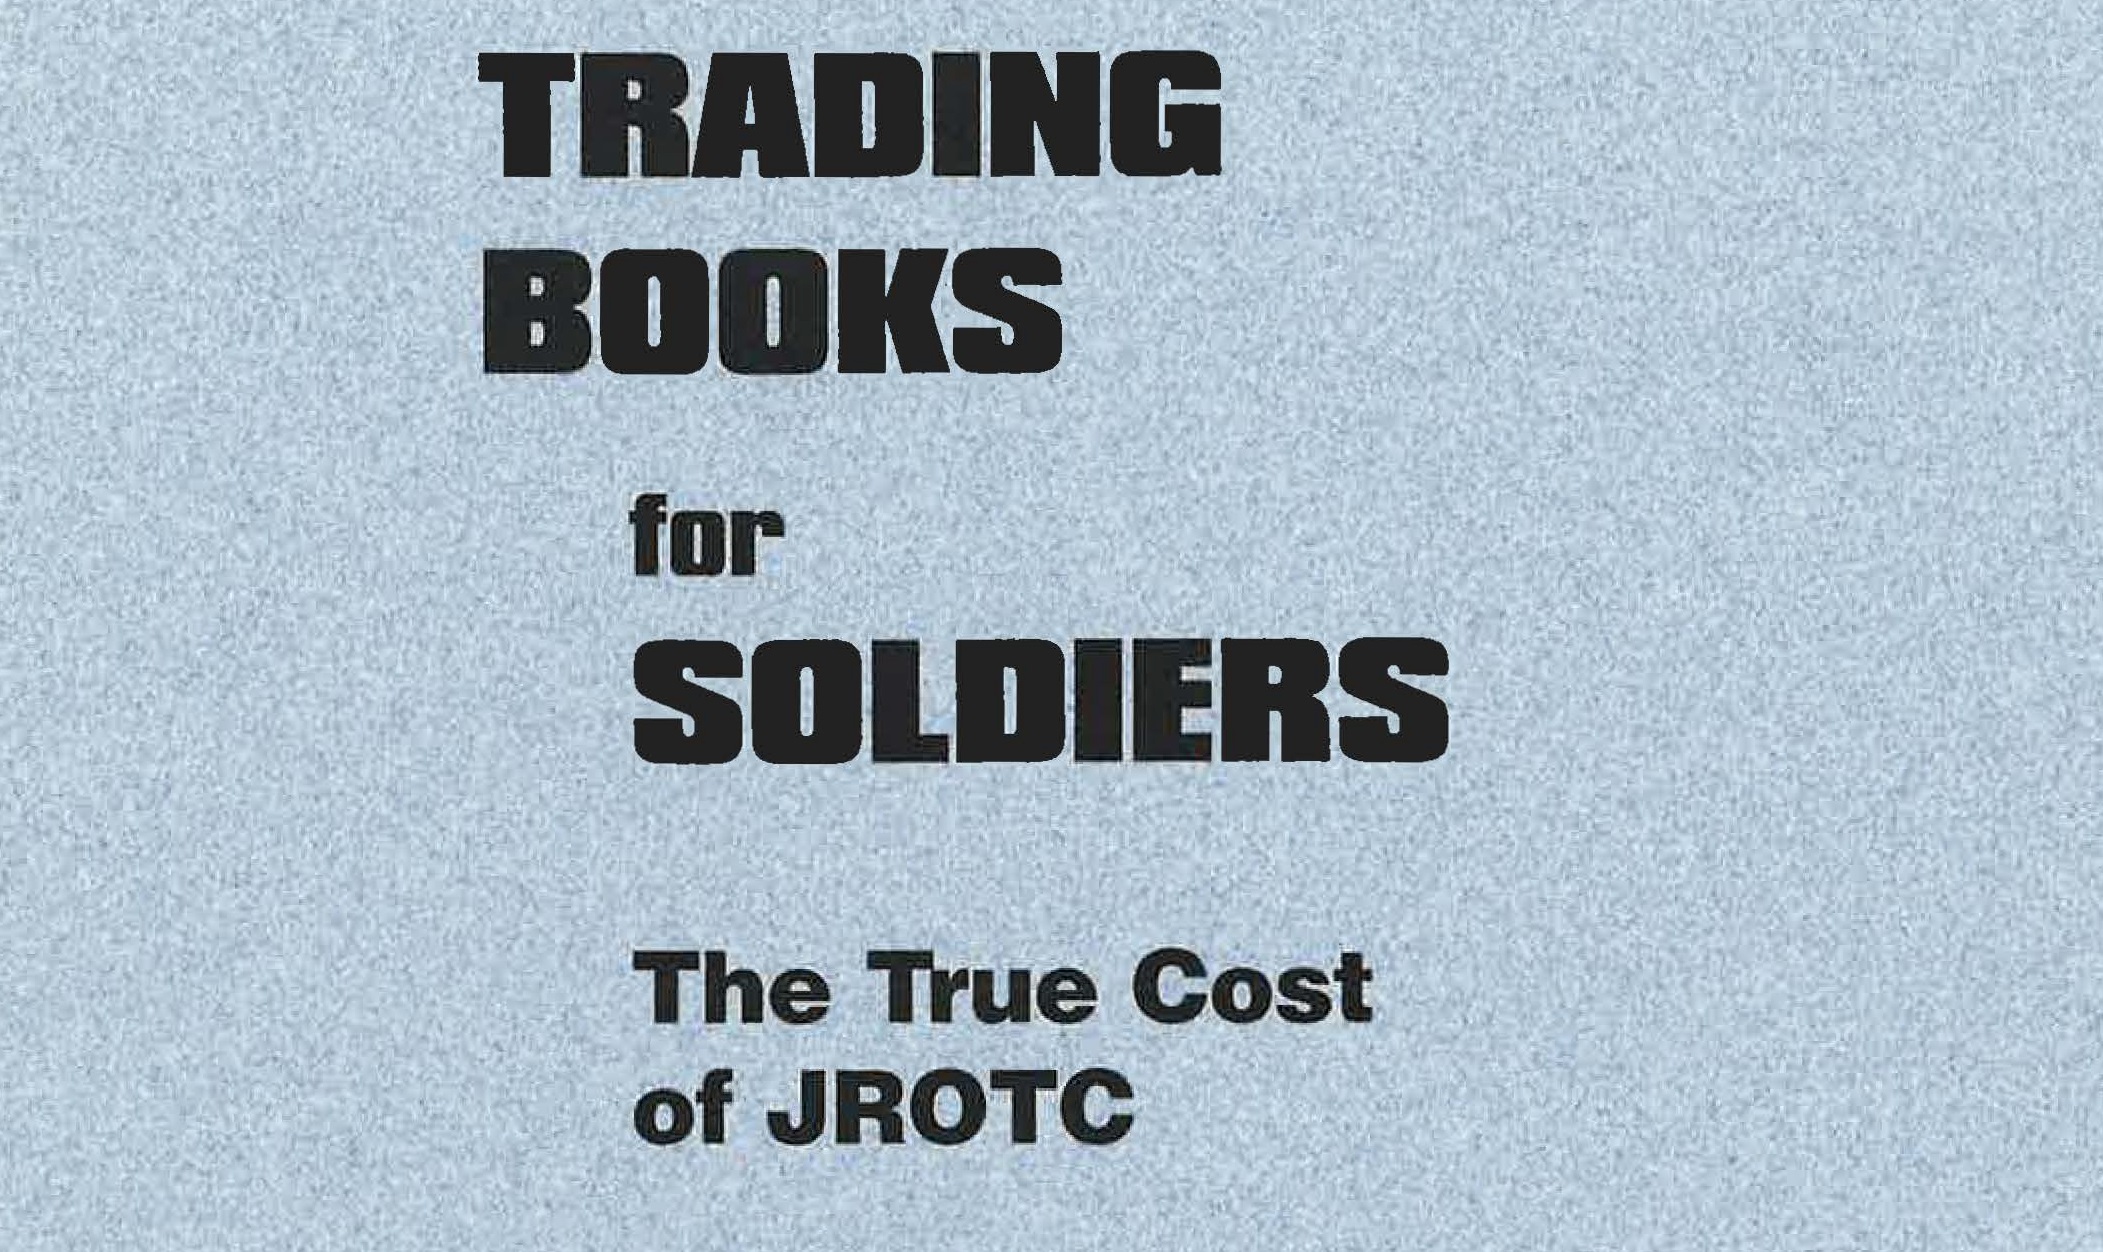 Trading Books for Soldiers The True Cost of JROTC